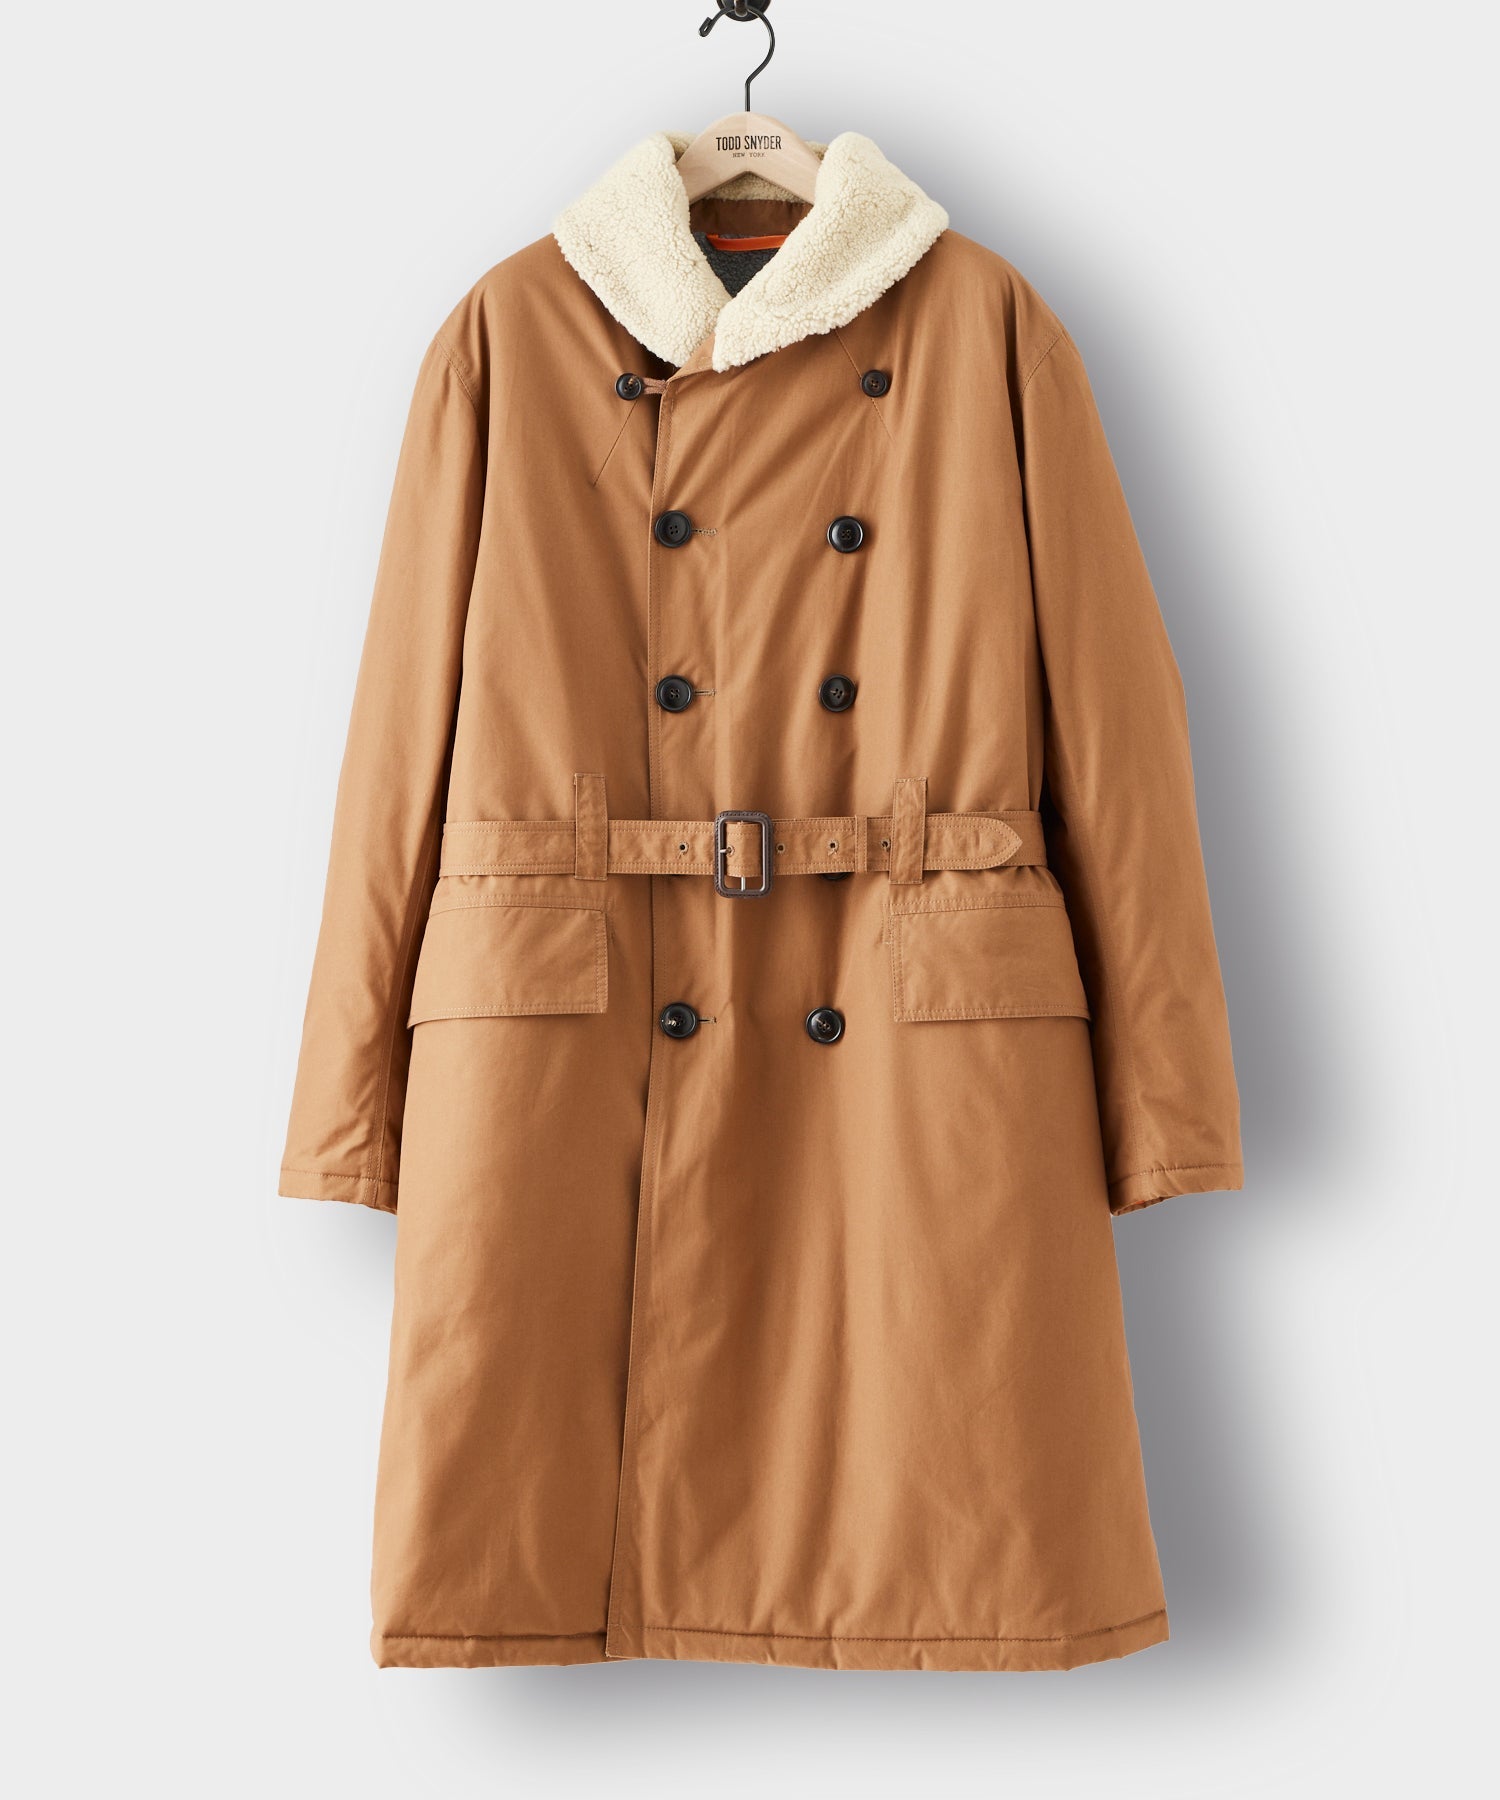 Todd Snyder x Private White Jeep Coat with Shearling Shawl Collar